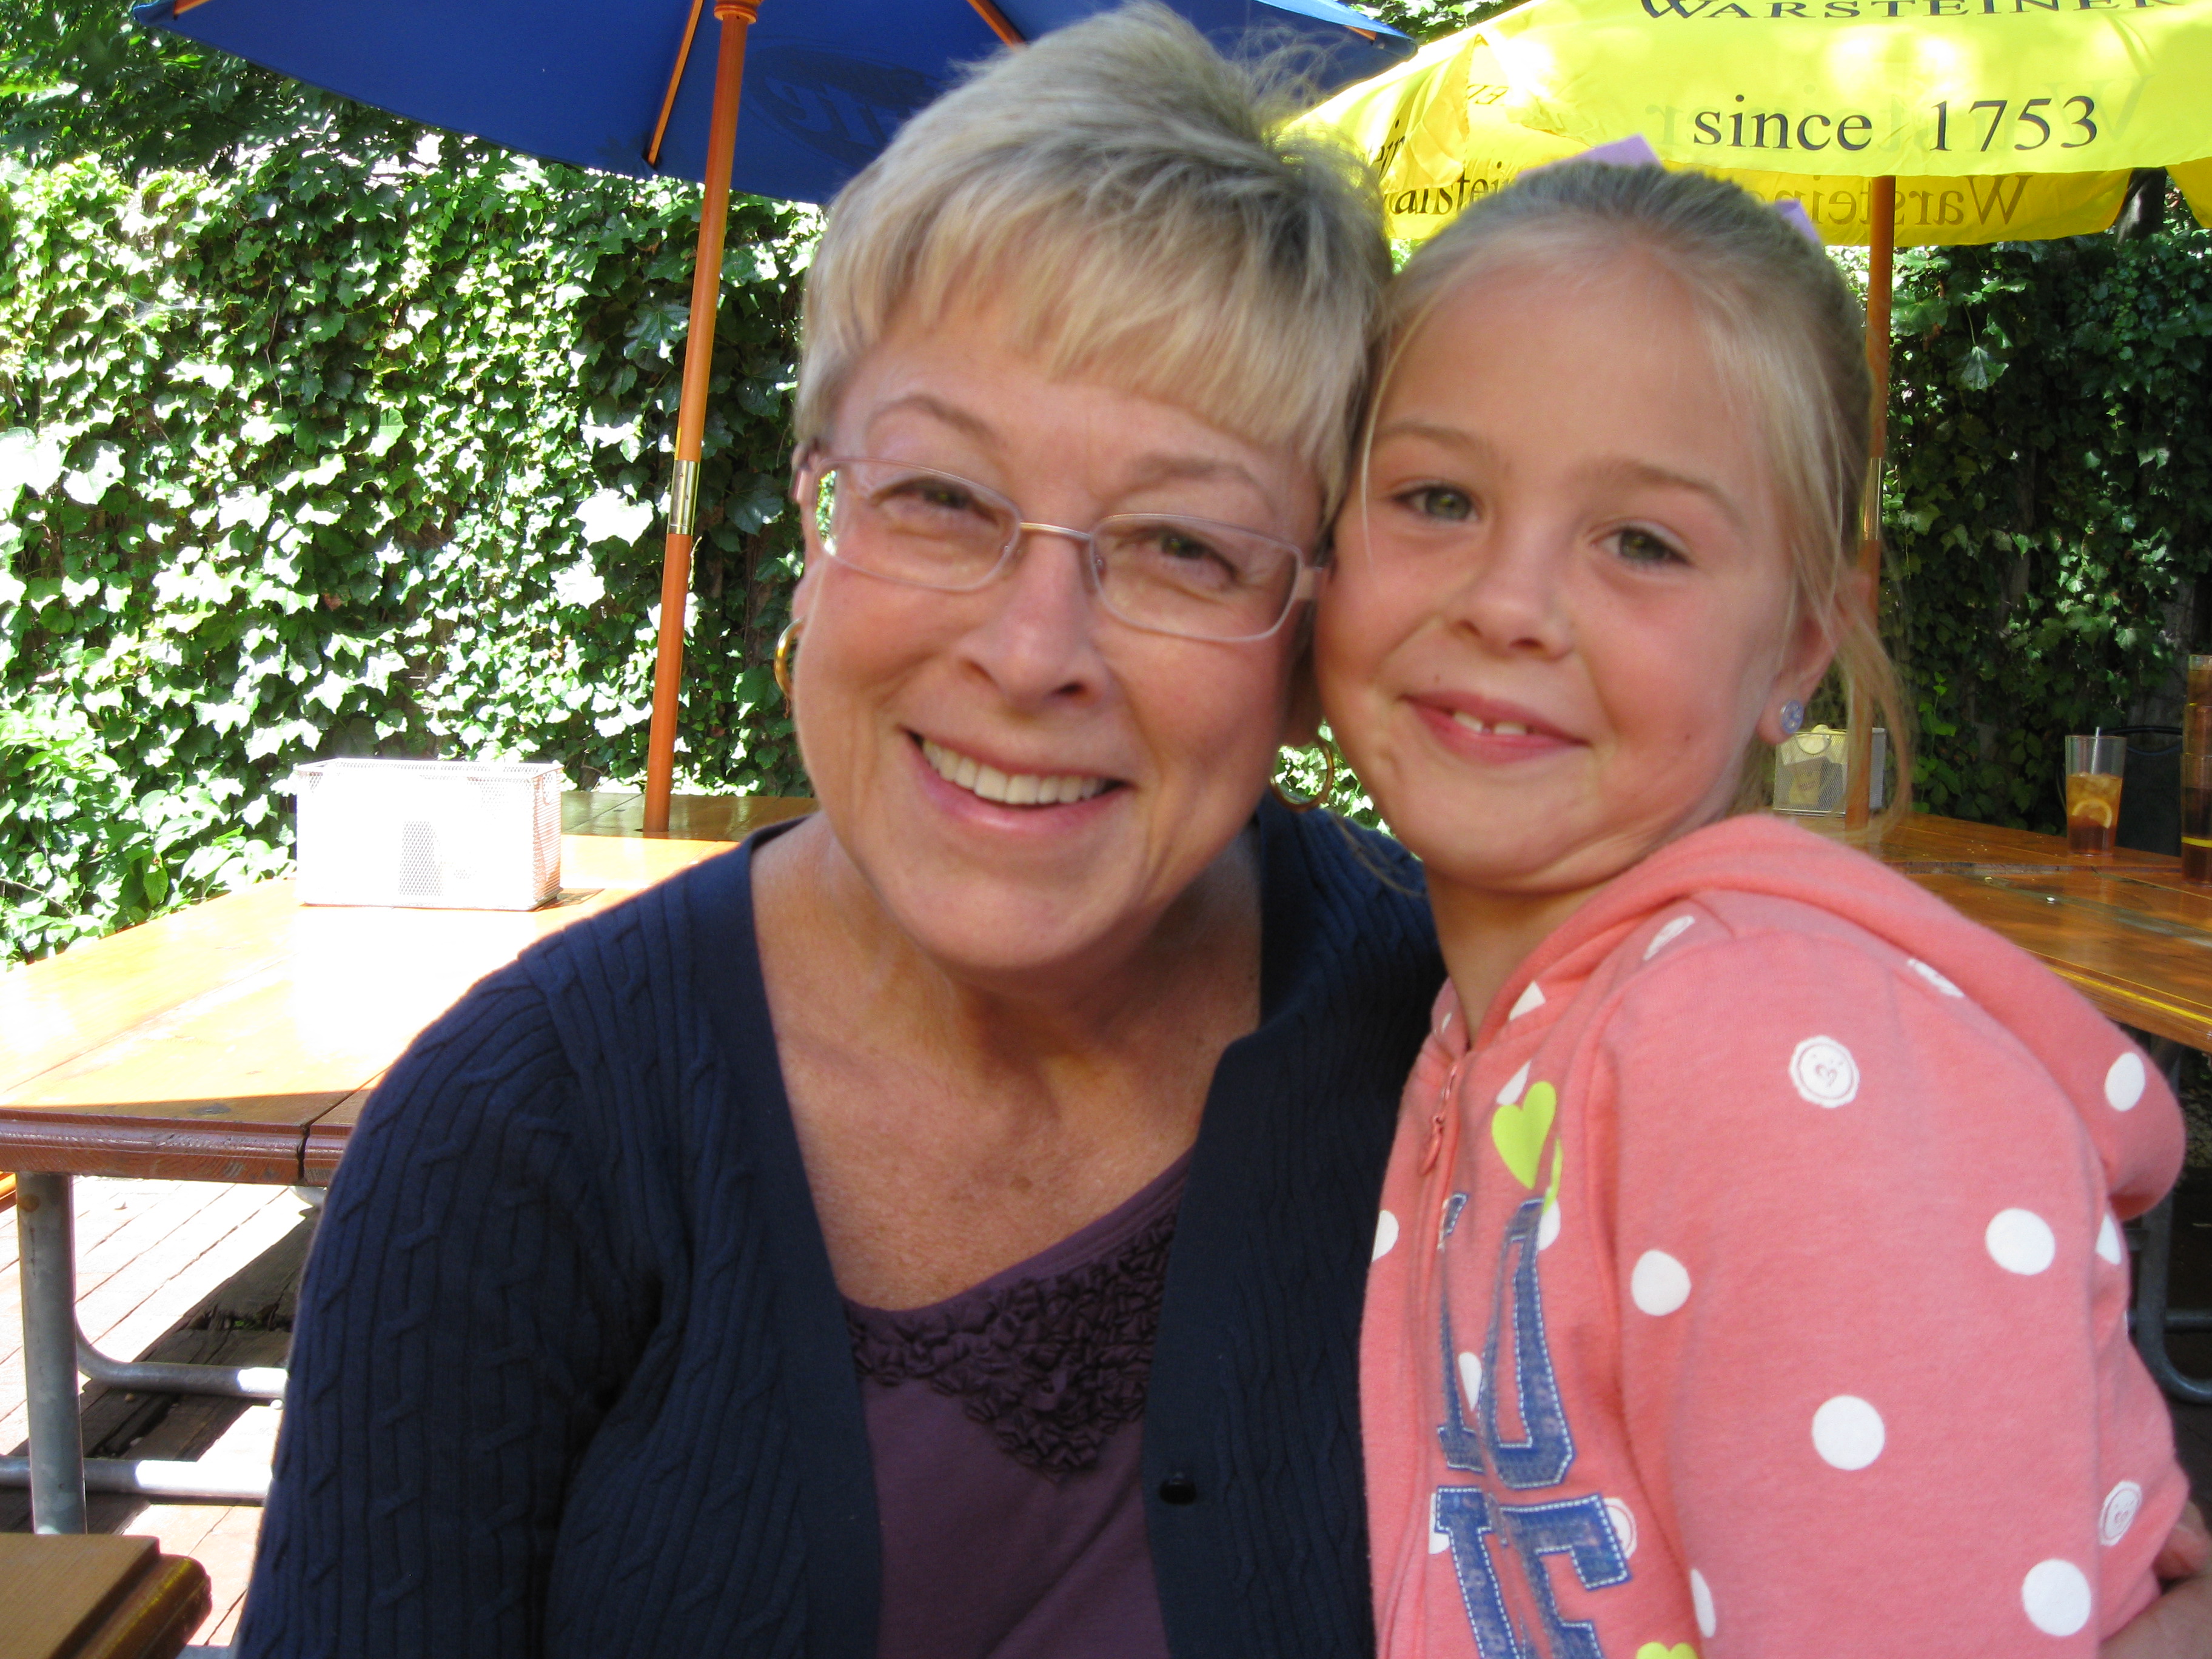 Sandie Sturdivant could not attend due to a family wedding but we have this August 2011 photo of Sandie and her grand-daughter.